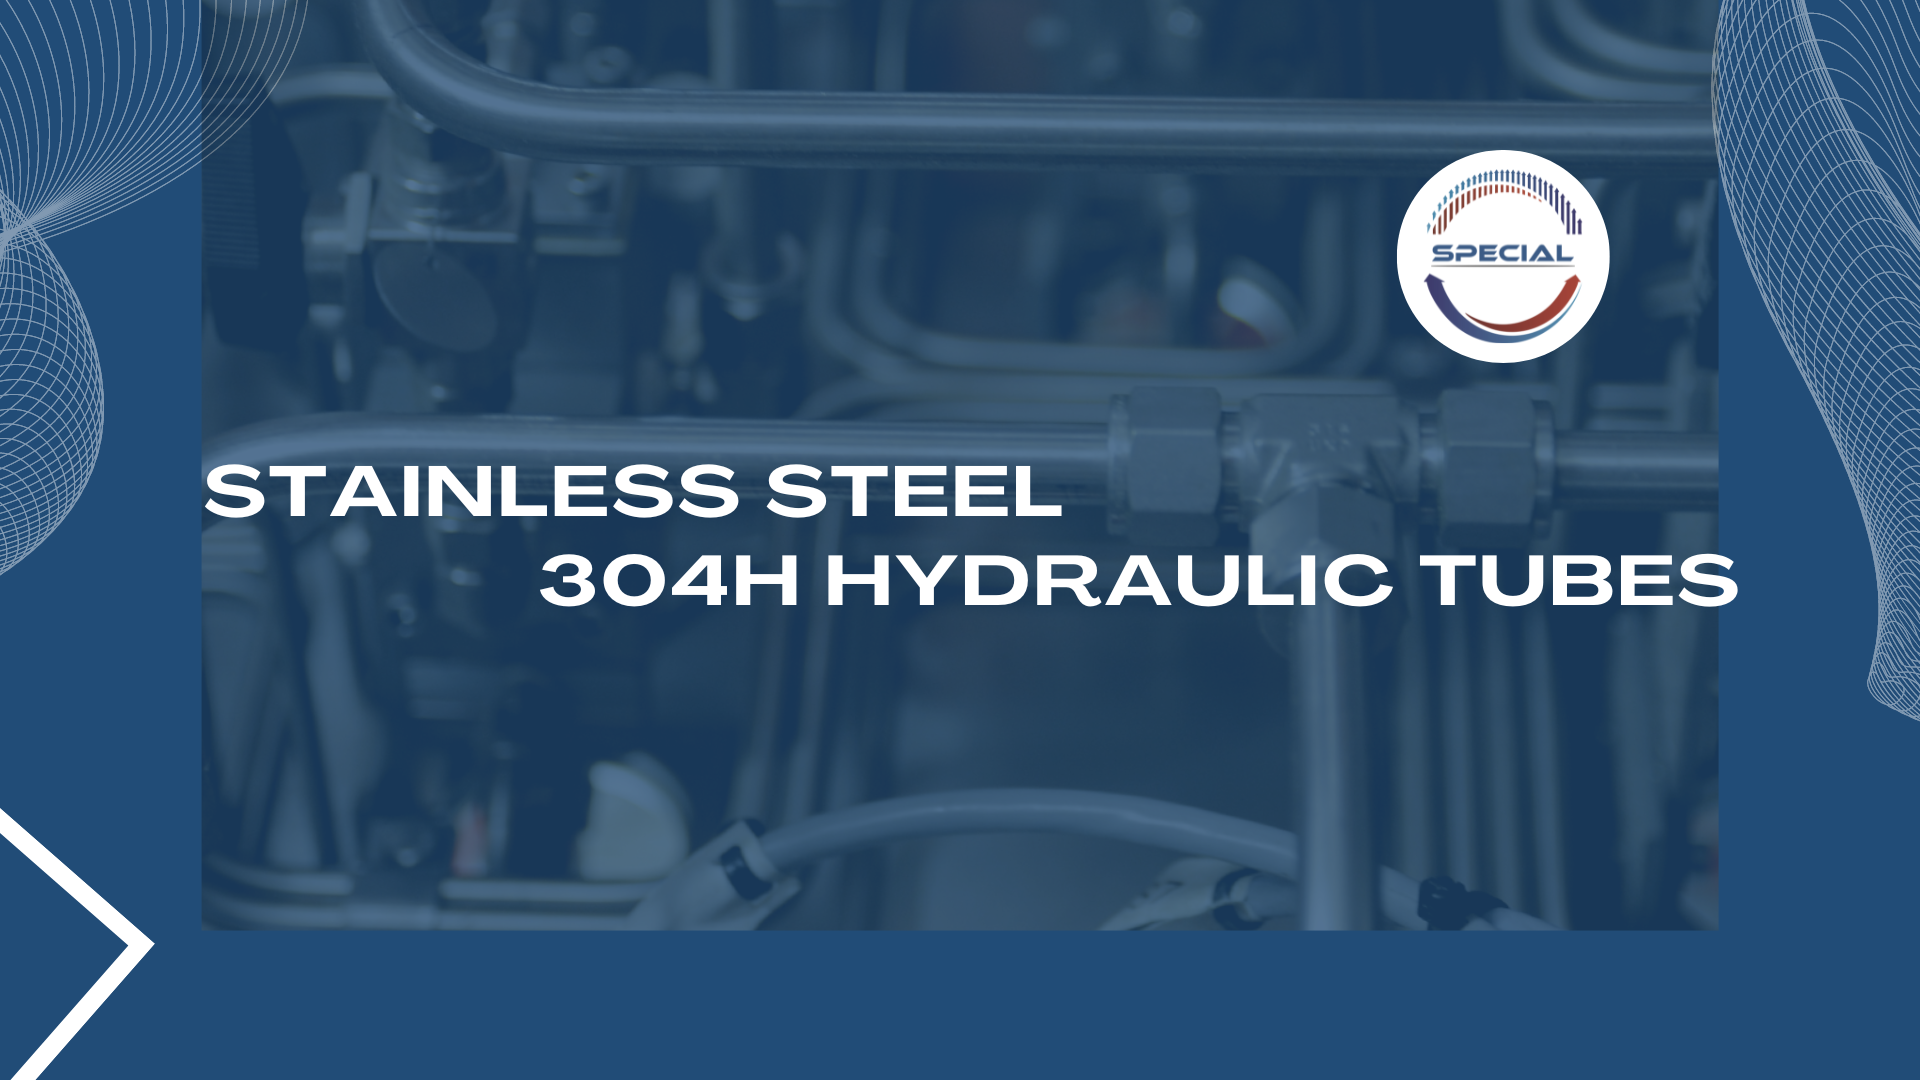 Stainless steel 304H hydraulic tubes